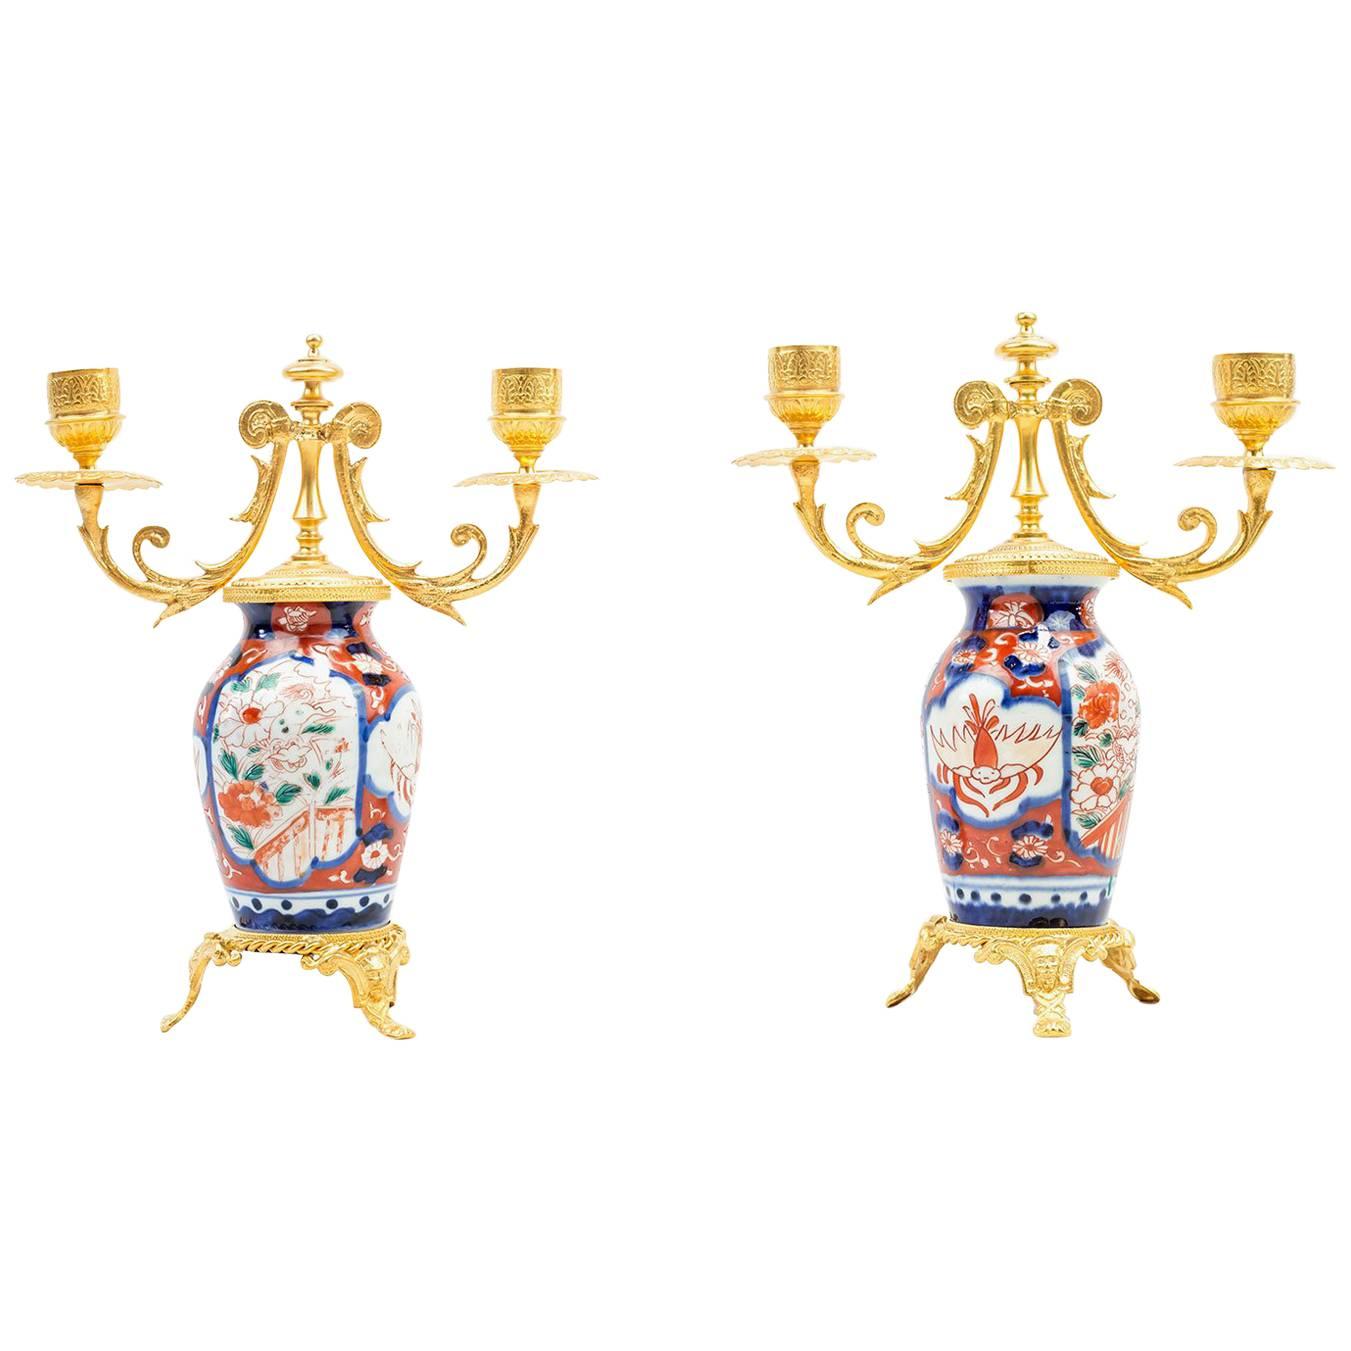 Pair of Porcelain Lampstands, Imari Decoration, Second Half of the 19th Century